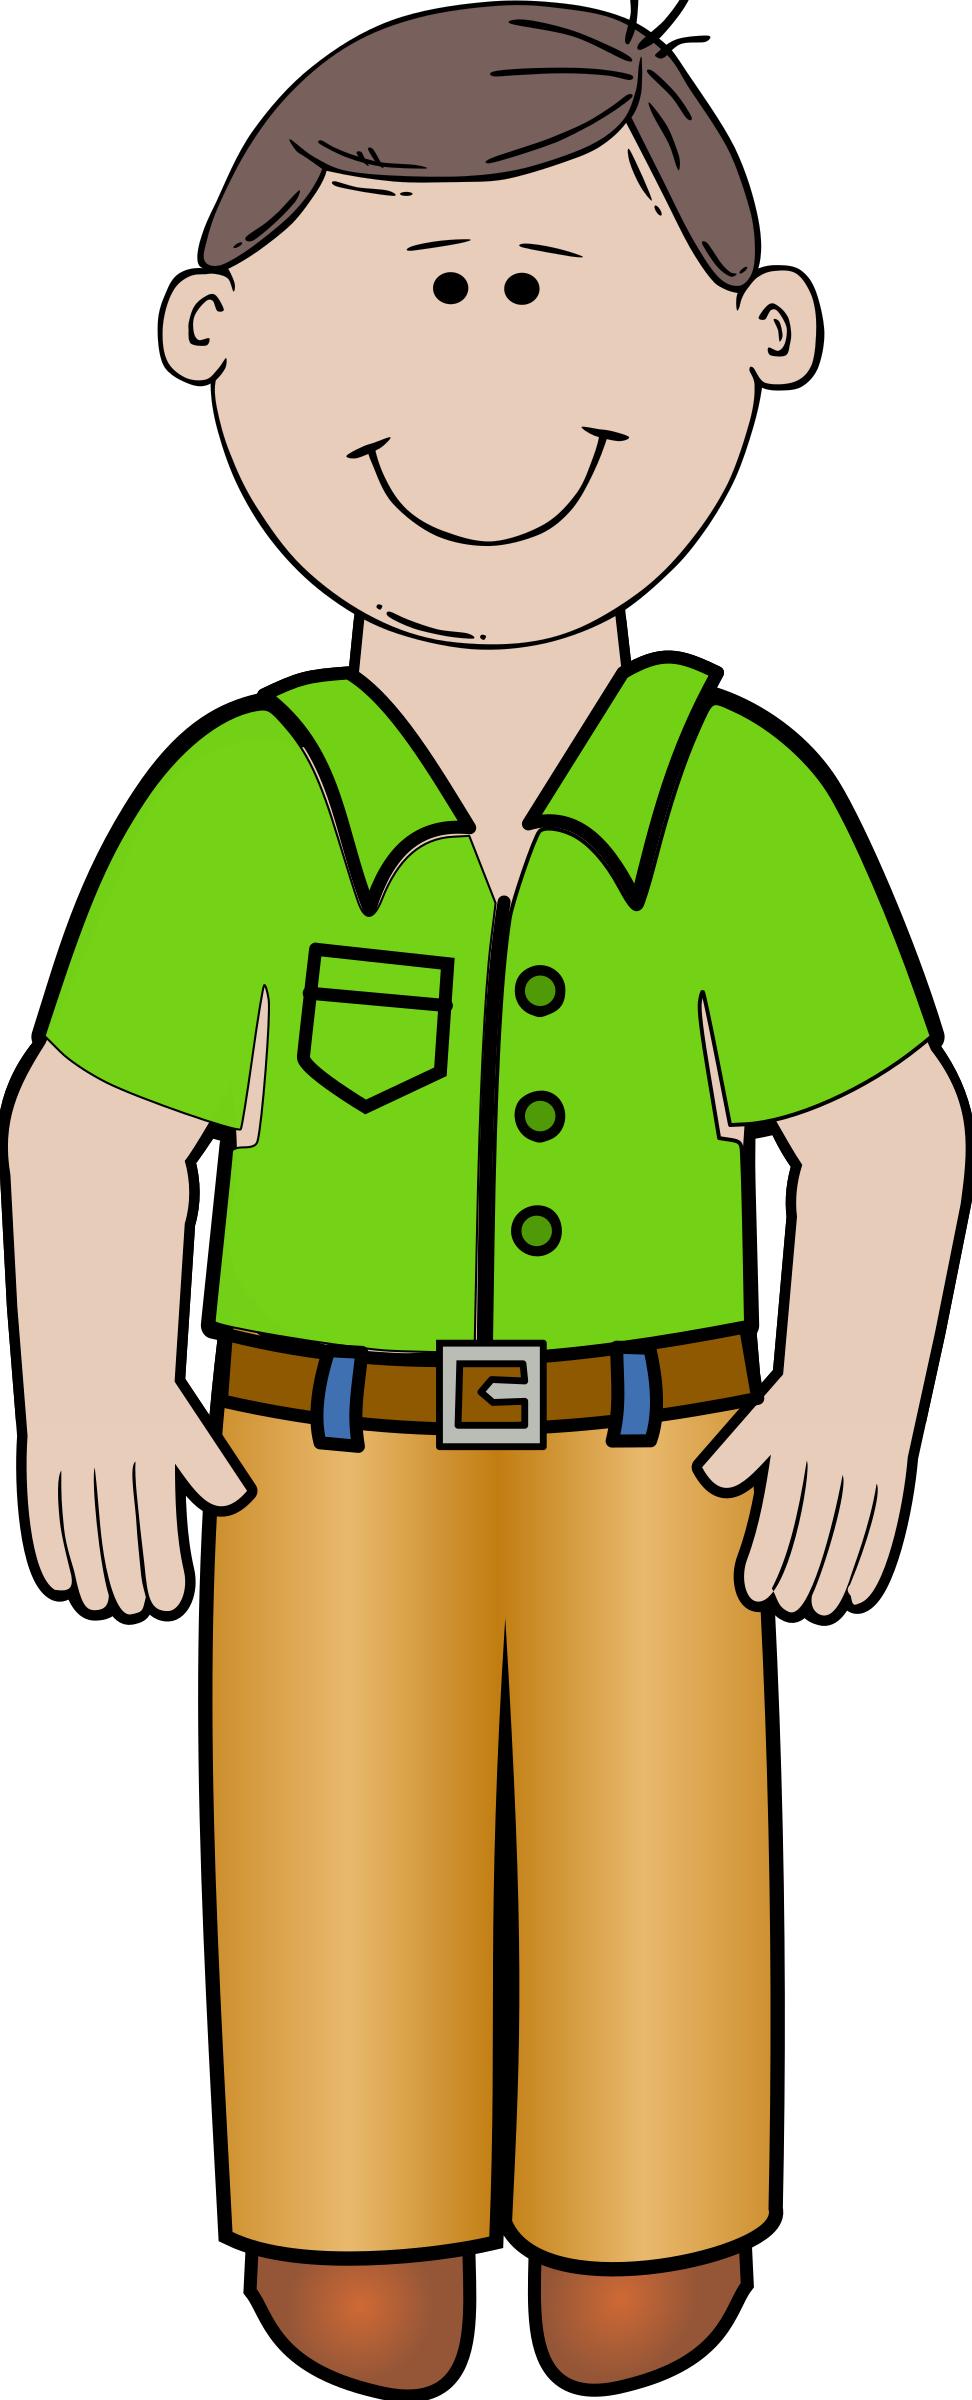 daddy standing 02 png